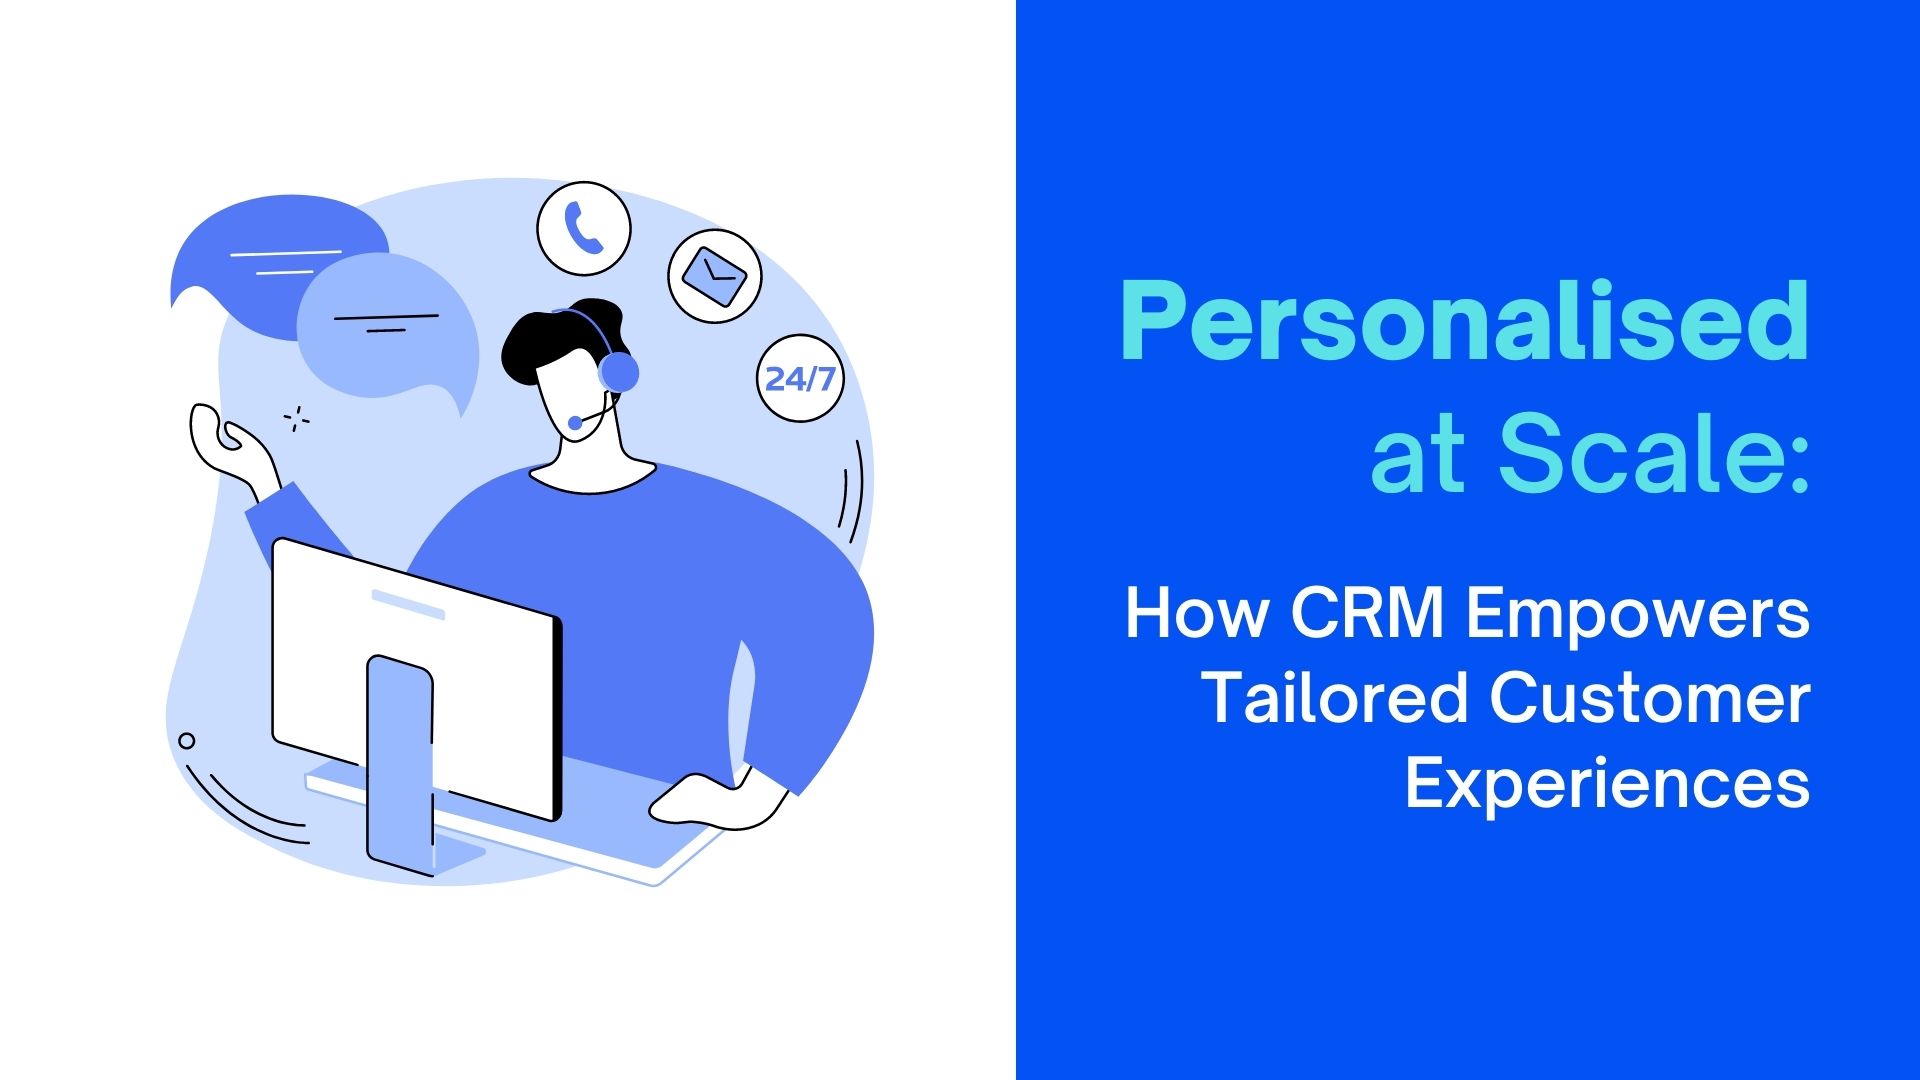 Personalization at Scale: How CRM Empowers Tailored Customer Experiences